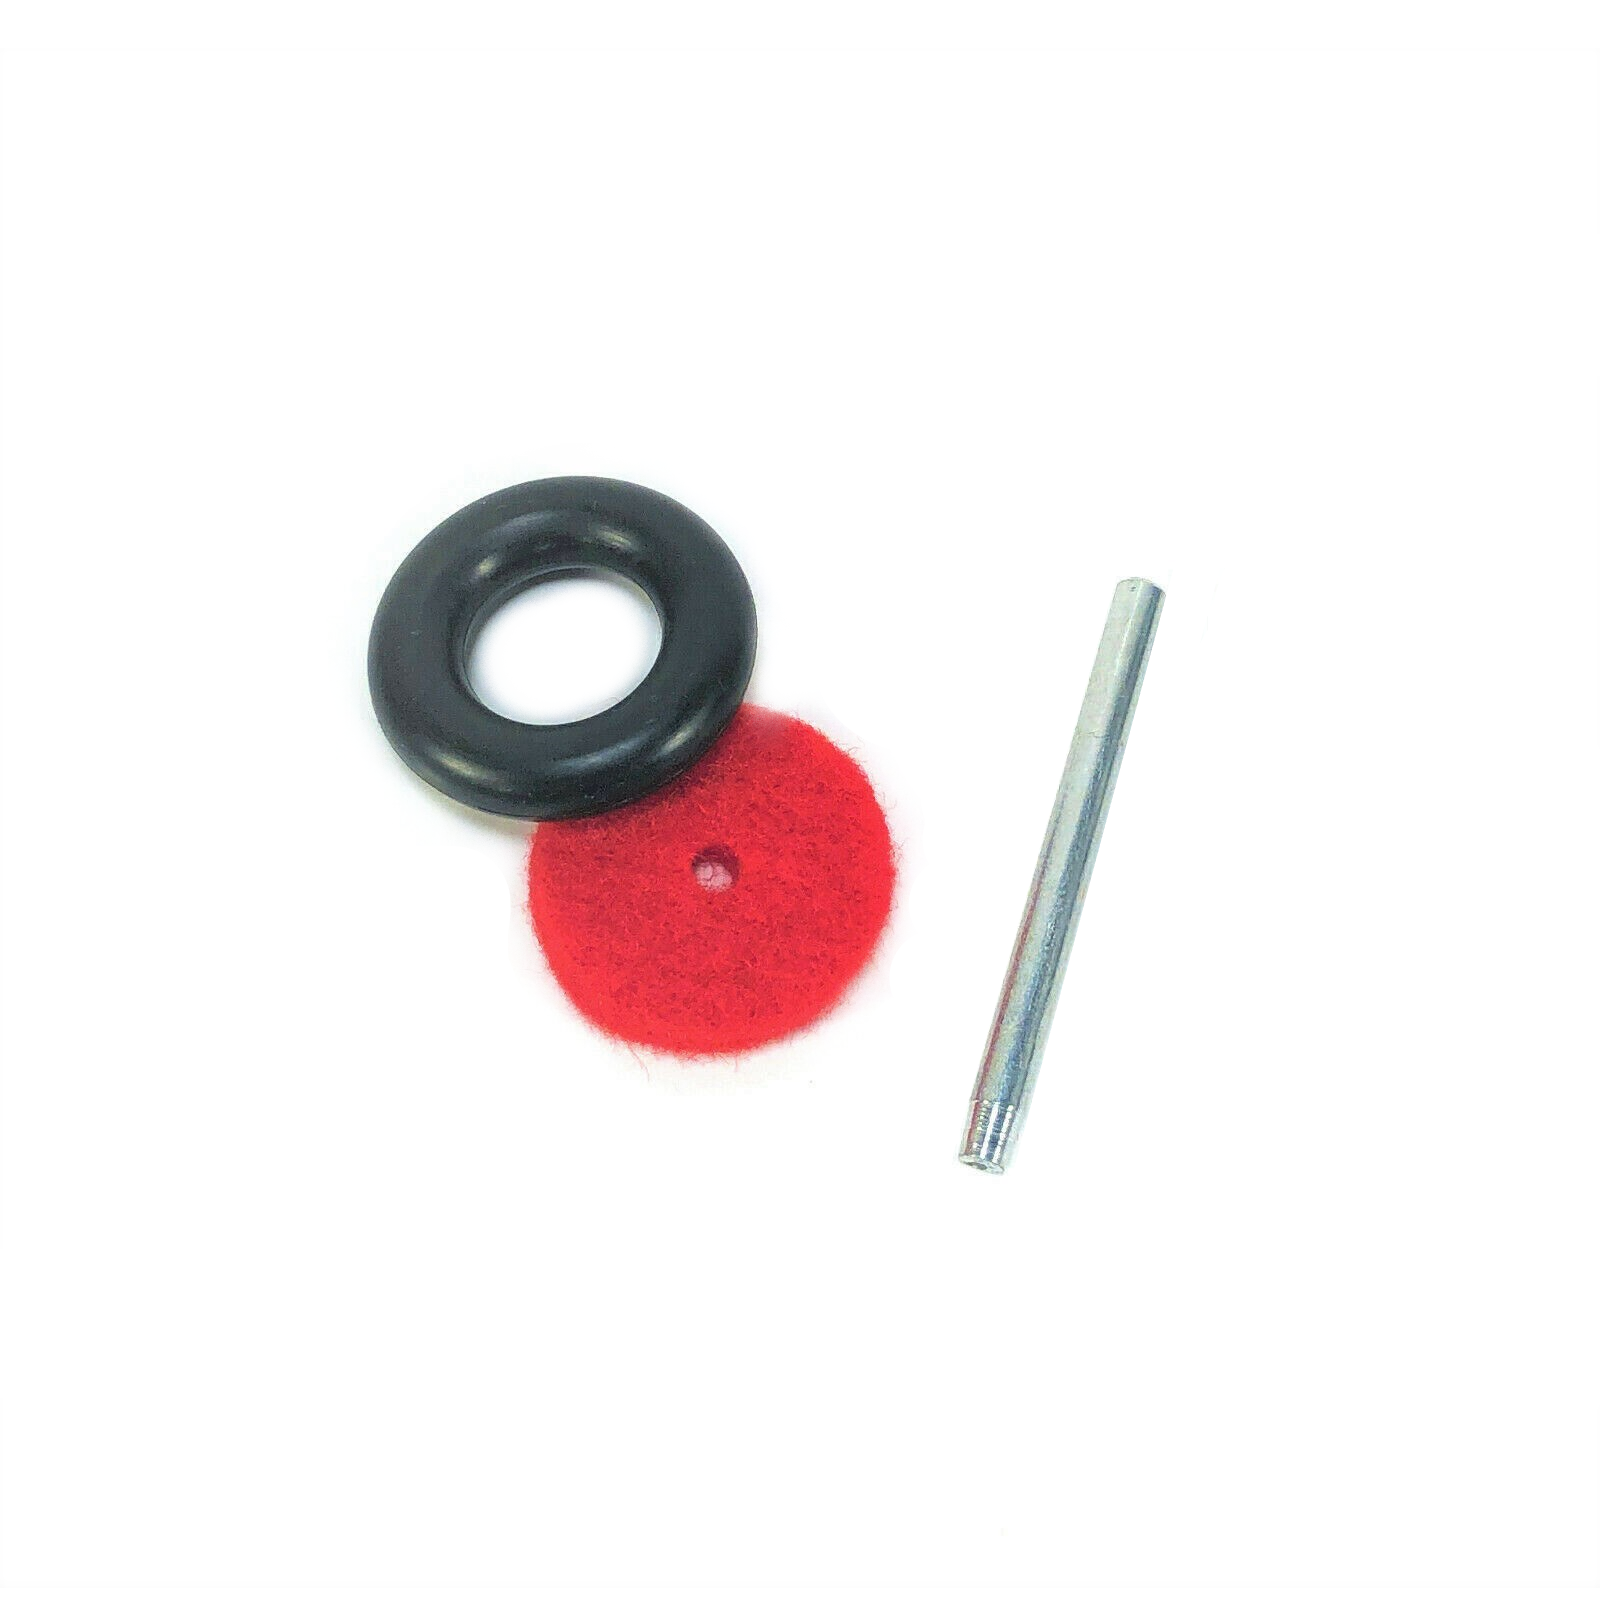 Sewing Machine BOBBINS for House/ Industrial Sewing Machine Spool